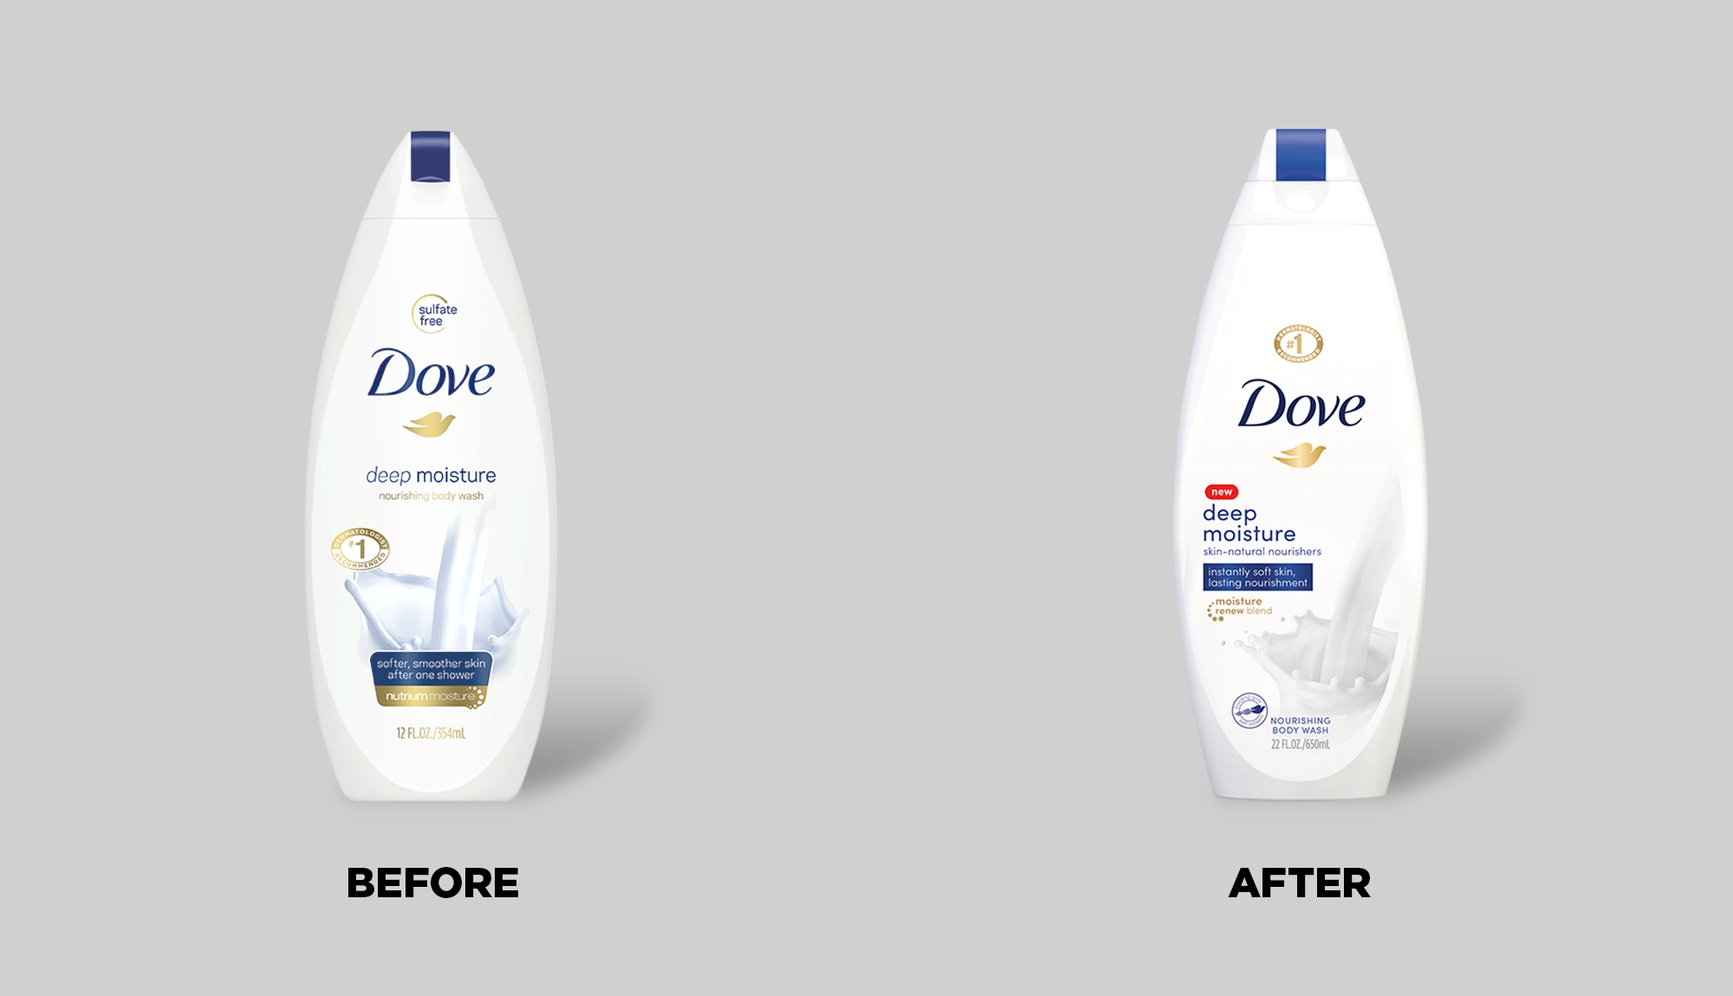 Dove Body Wash Revitalized Its Packaging—and Cleaned Up in Market